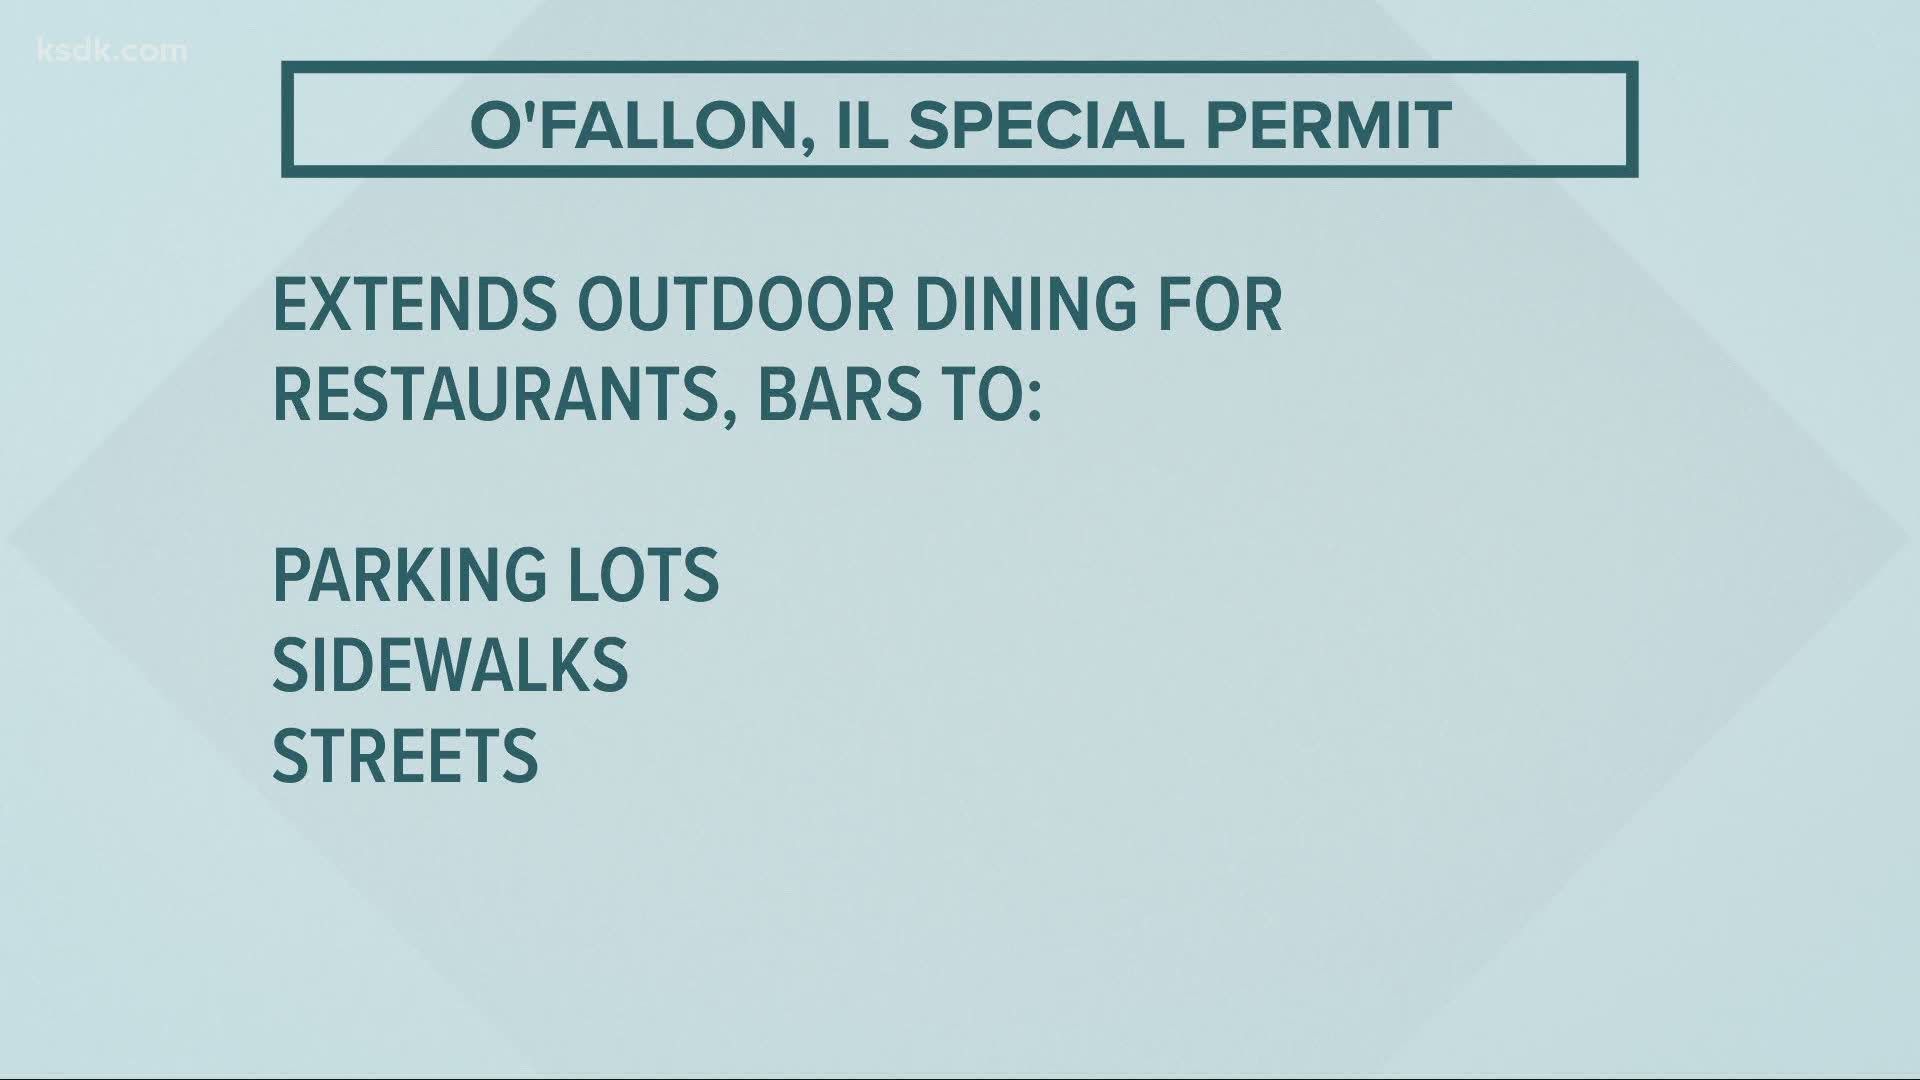 Bars and restaurants in O'Fallon will be able to extend outdoor seating options to include the use of parking lots, sidewalks and streets